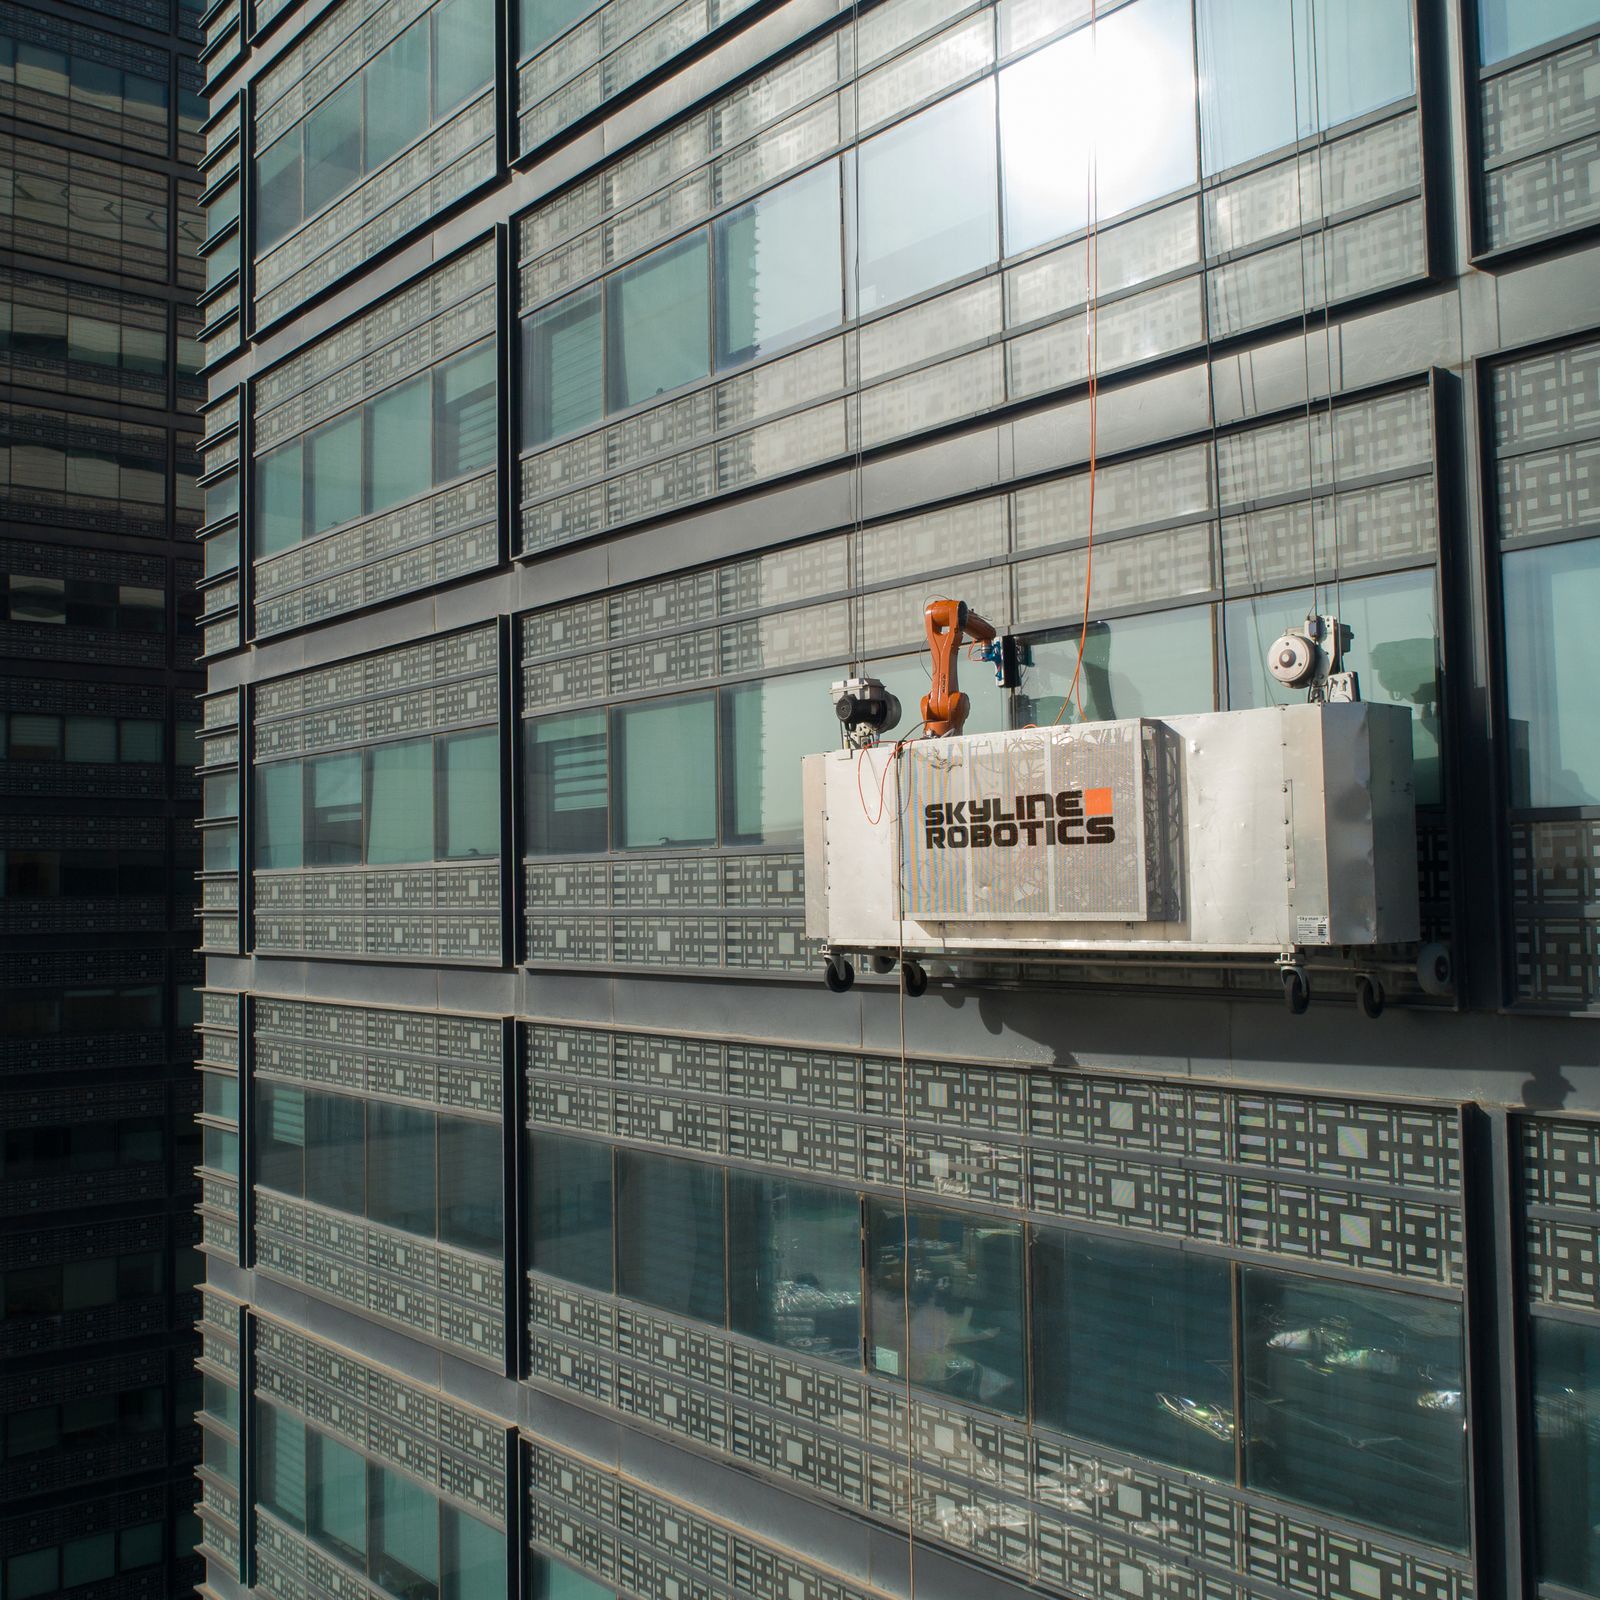 Robot window washers here to clean our